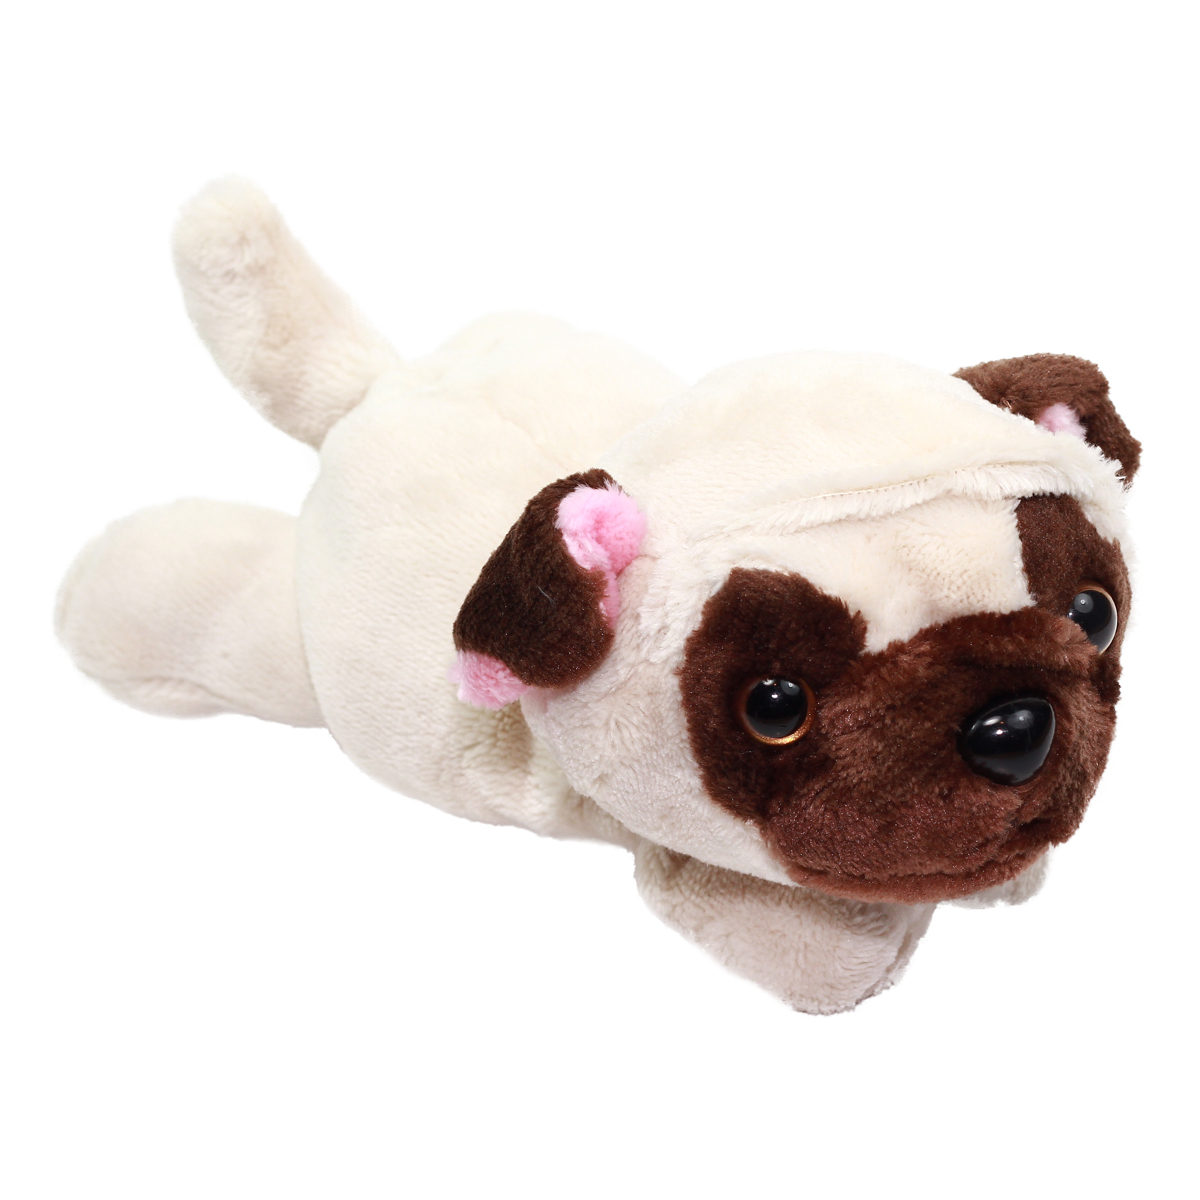 Kawaii Friends Dog Collection Beige Pug Plush 9 Inches